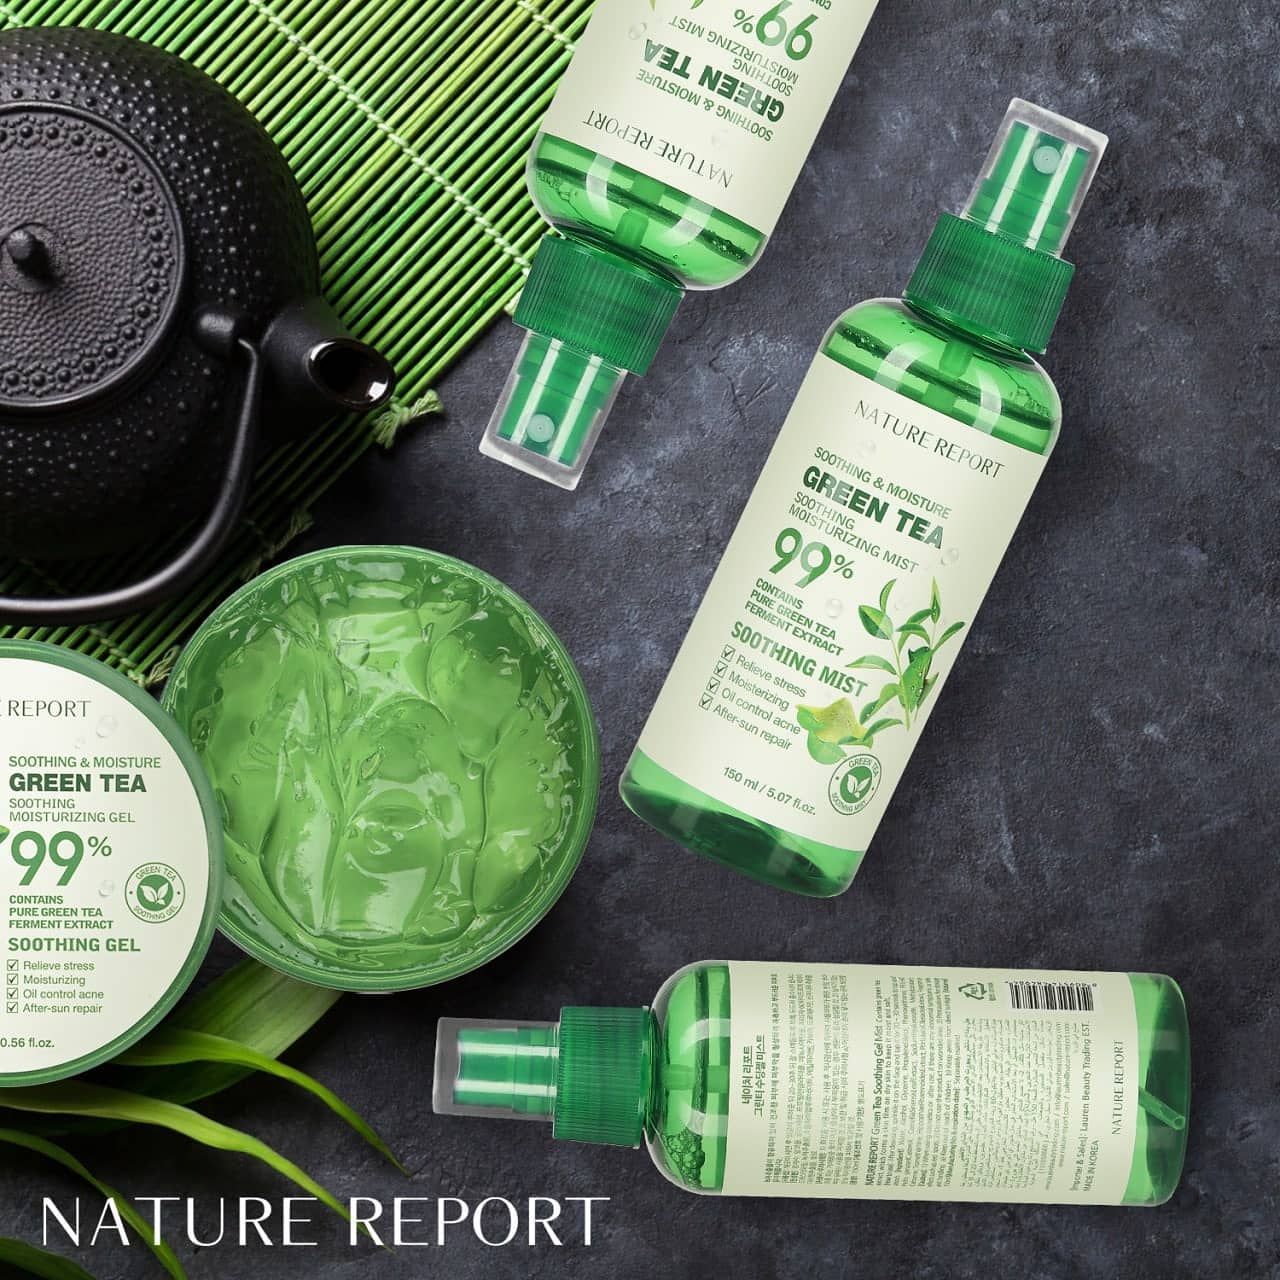 Nature Report Green Tea Soothing Mist 99% 150Ml - IZZAT DAOUK SA